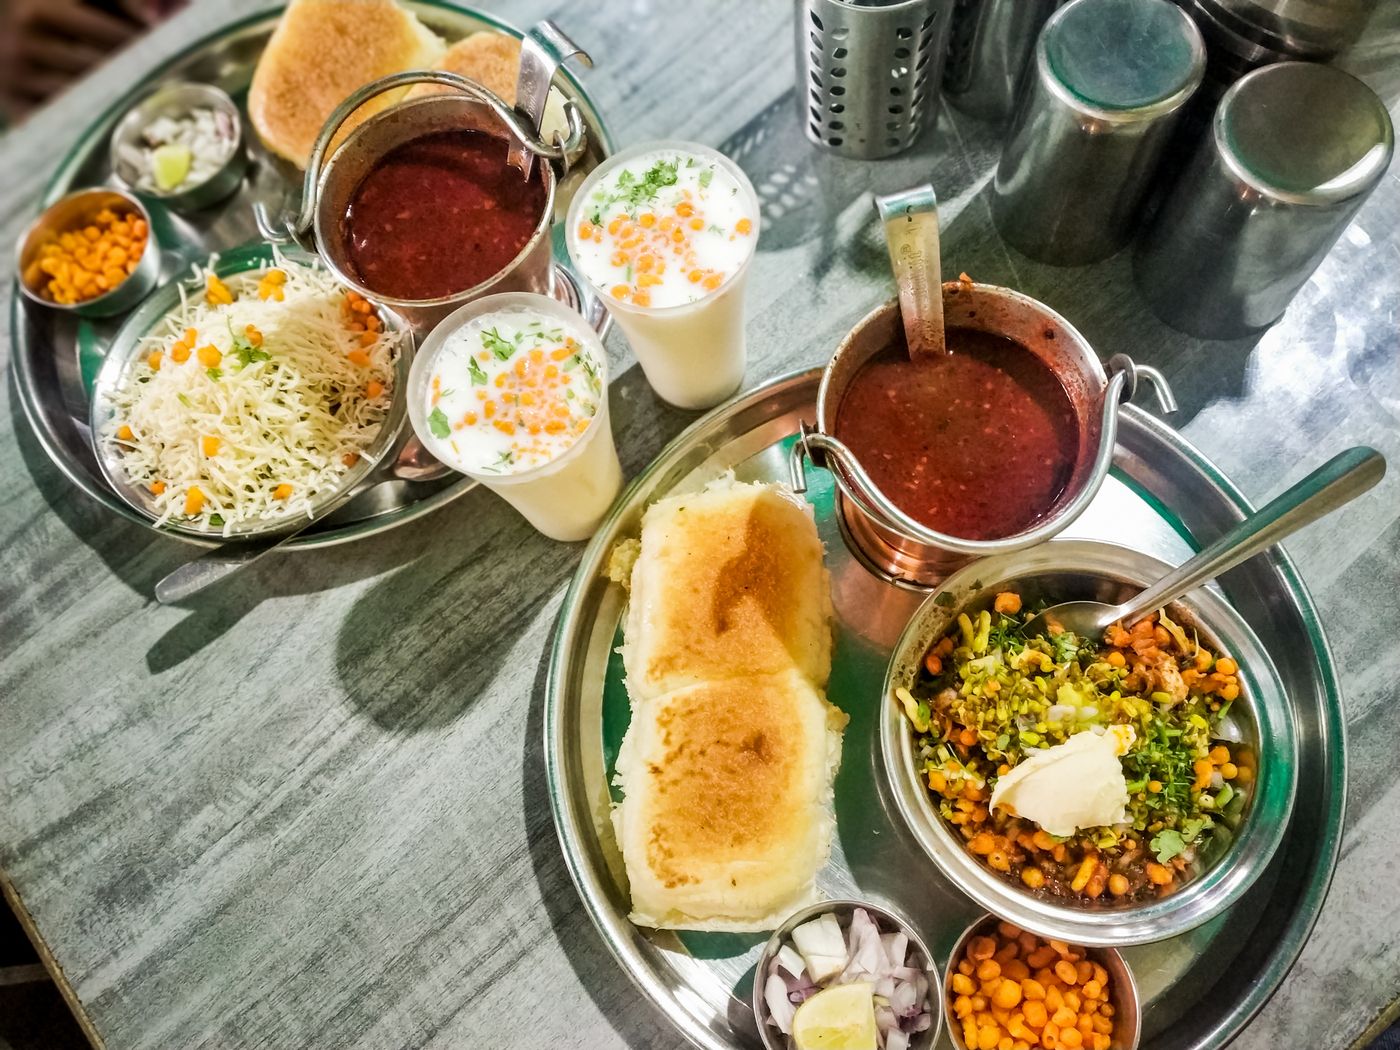 One of Mumbai's most sought after street food dishes is misal pav. It consists of sprout curry (called usal in regional language), with tomatoes and onion. It is finished off with a savory, fried mixture called farsan and lemon juice, and is accompanied by buttermilk and pav bread © Parth Rasse